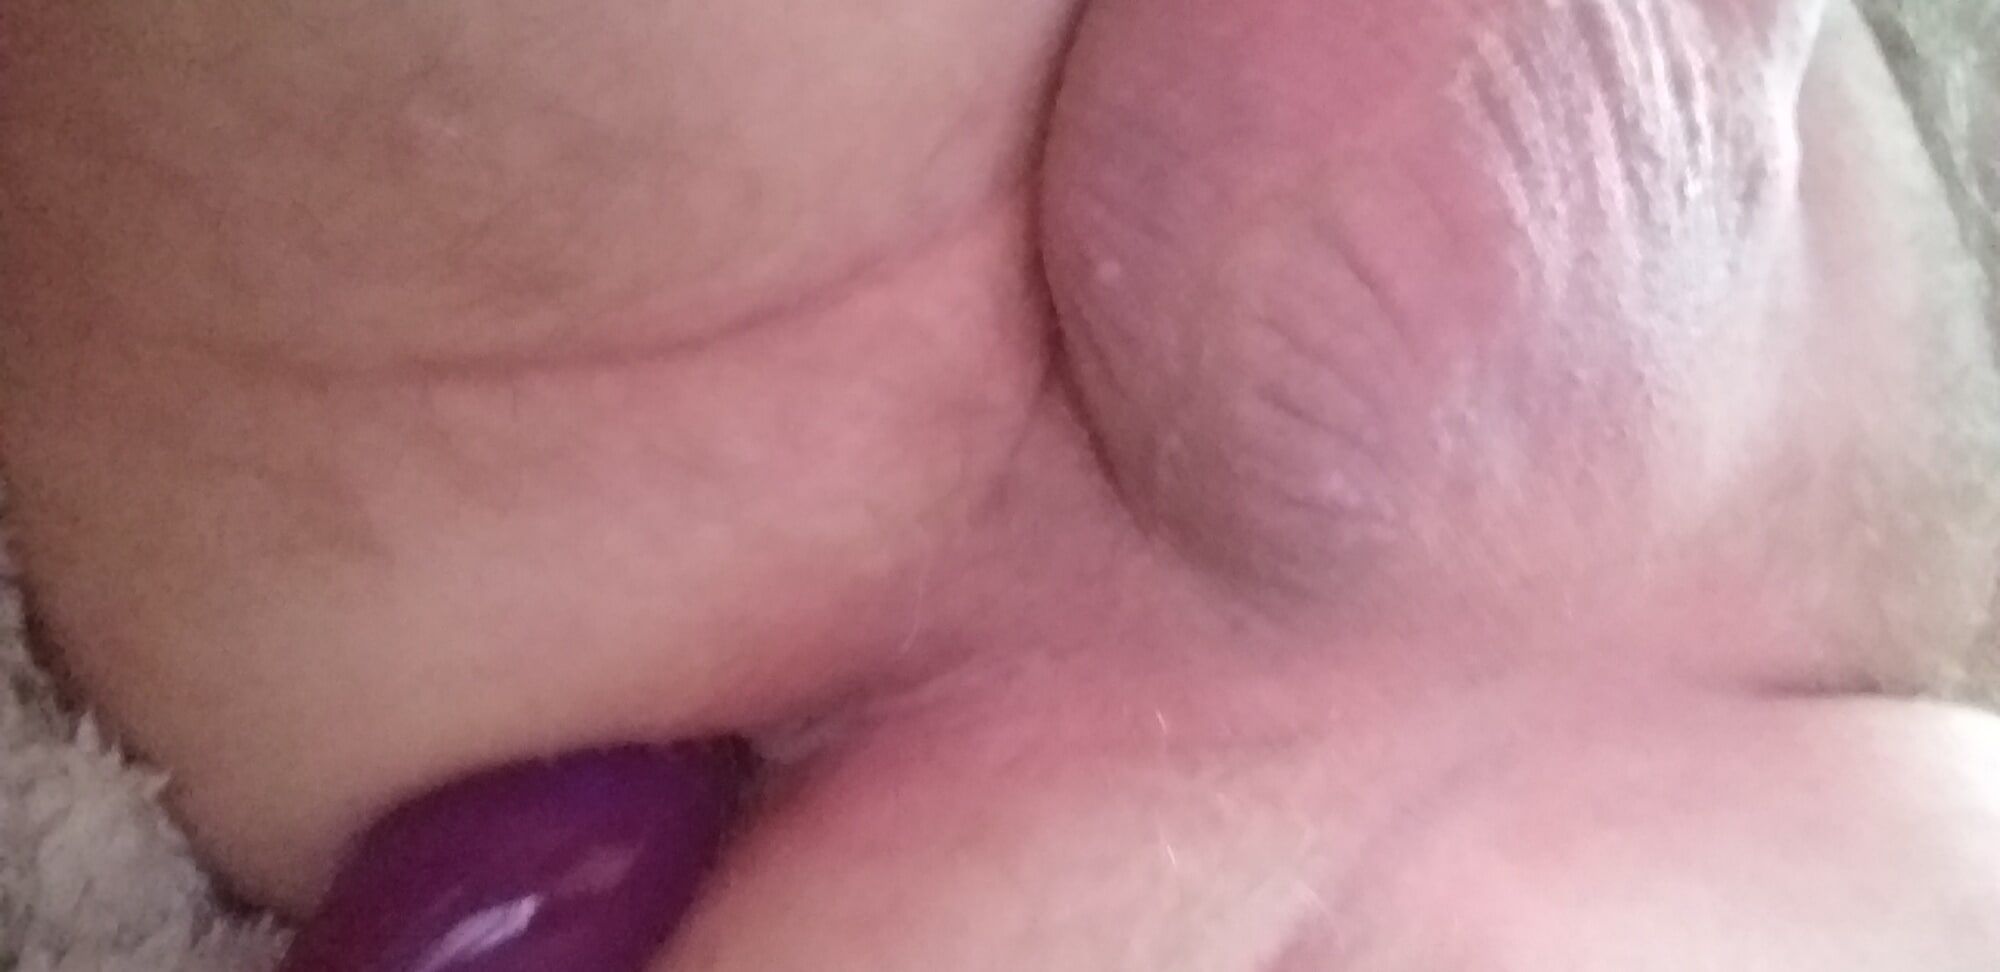 lying in bed and playing with a dildo in my ass and playing  #7